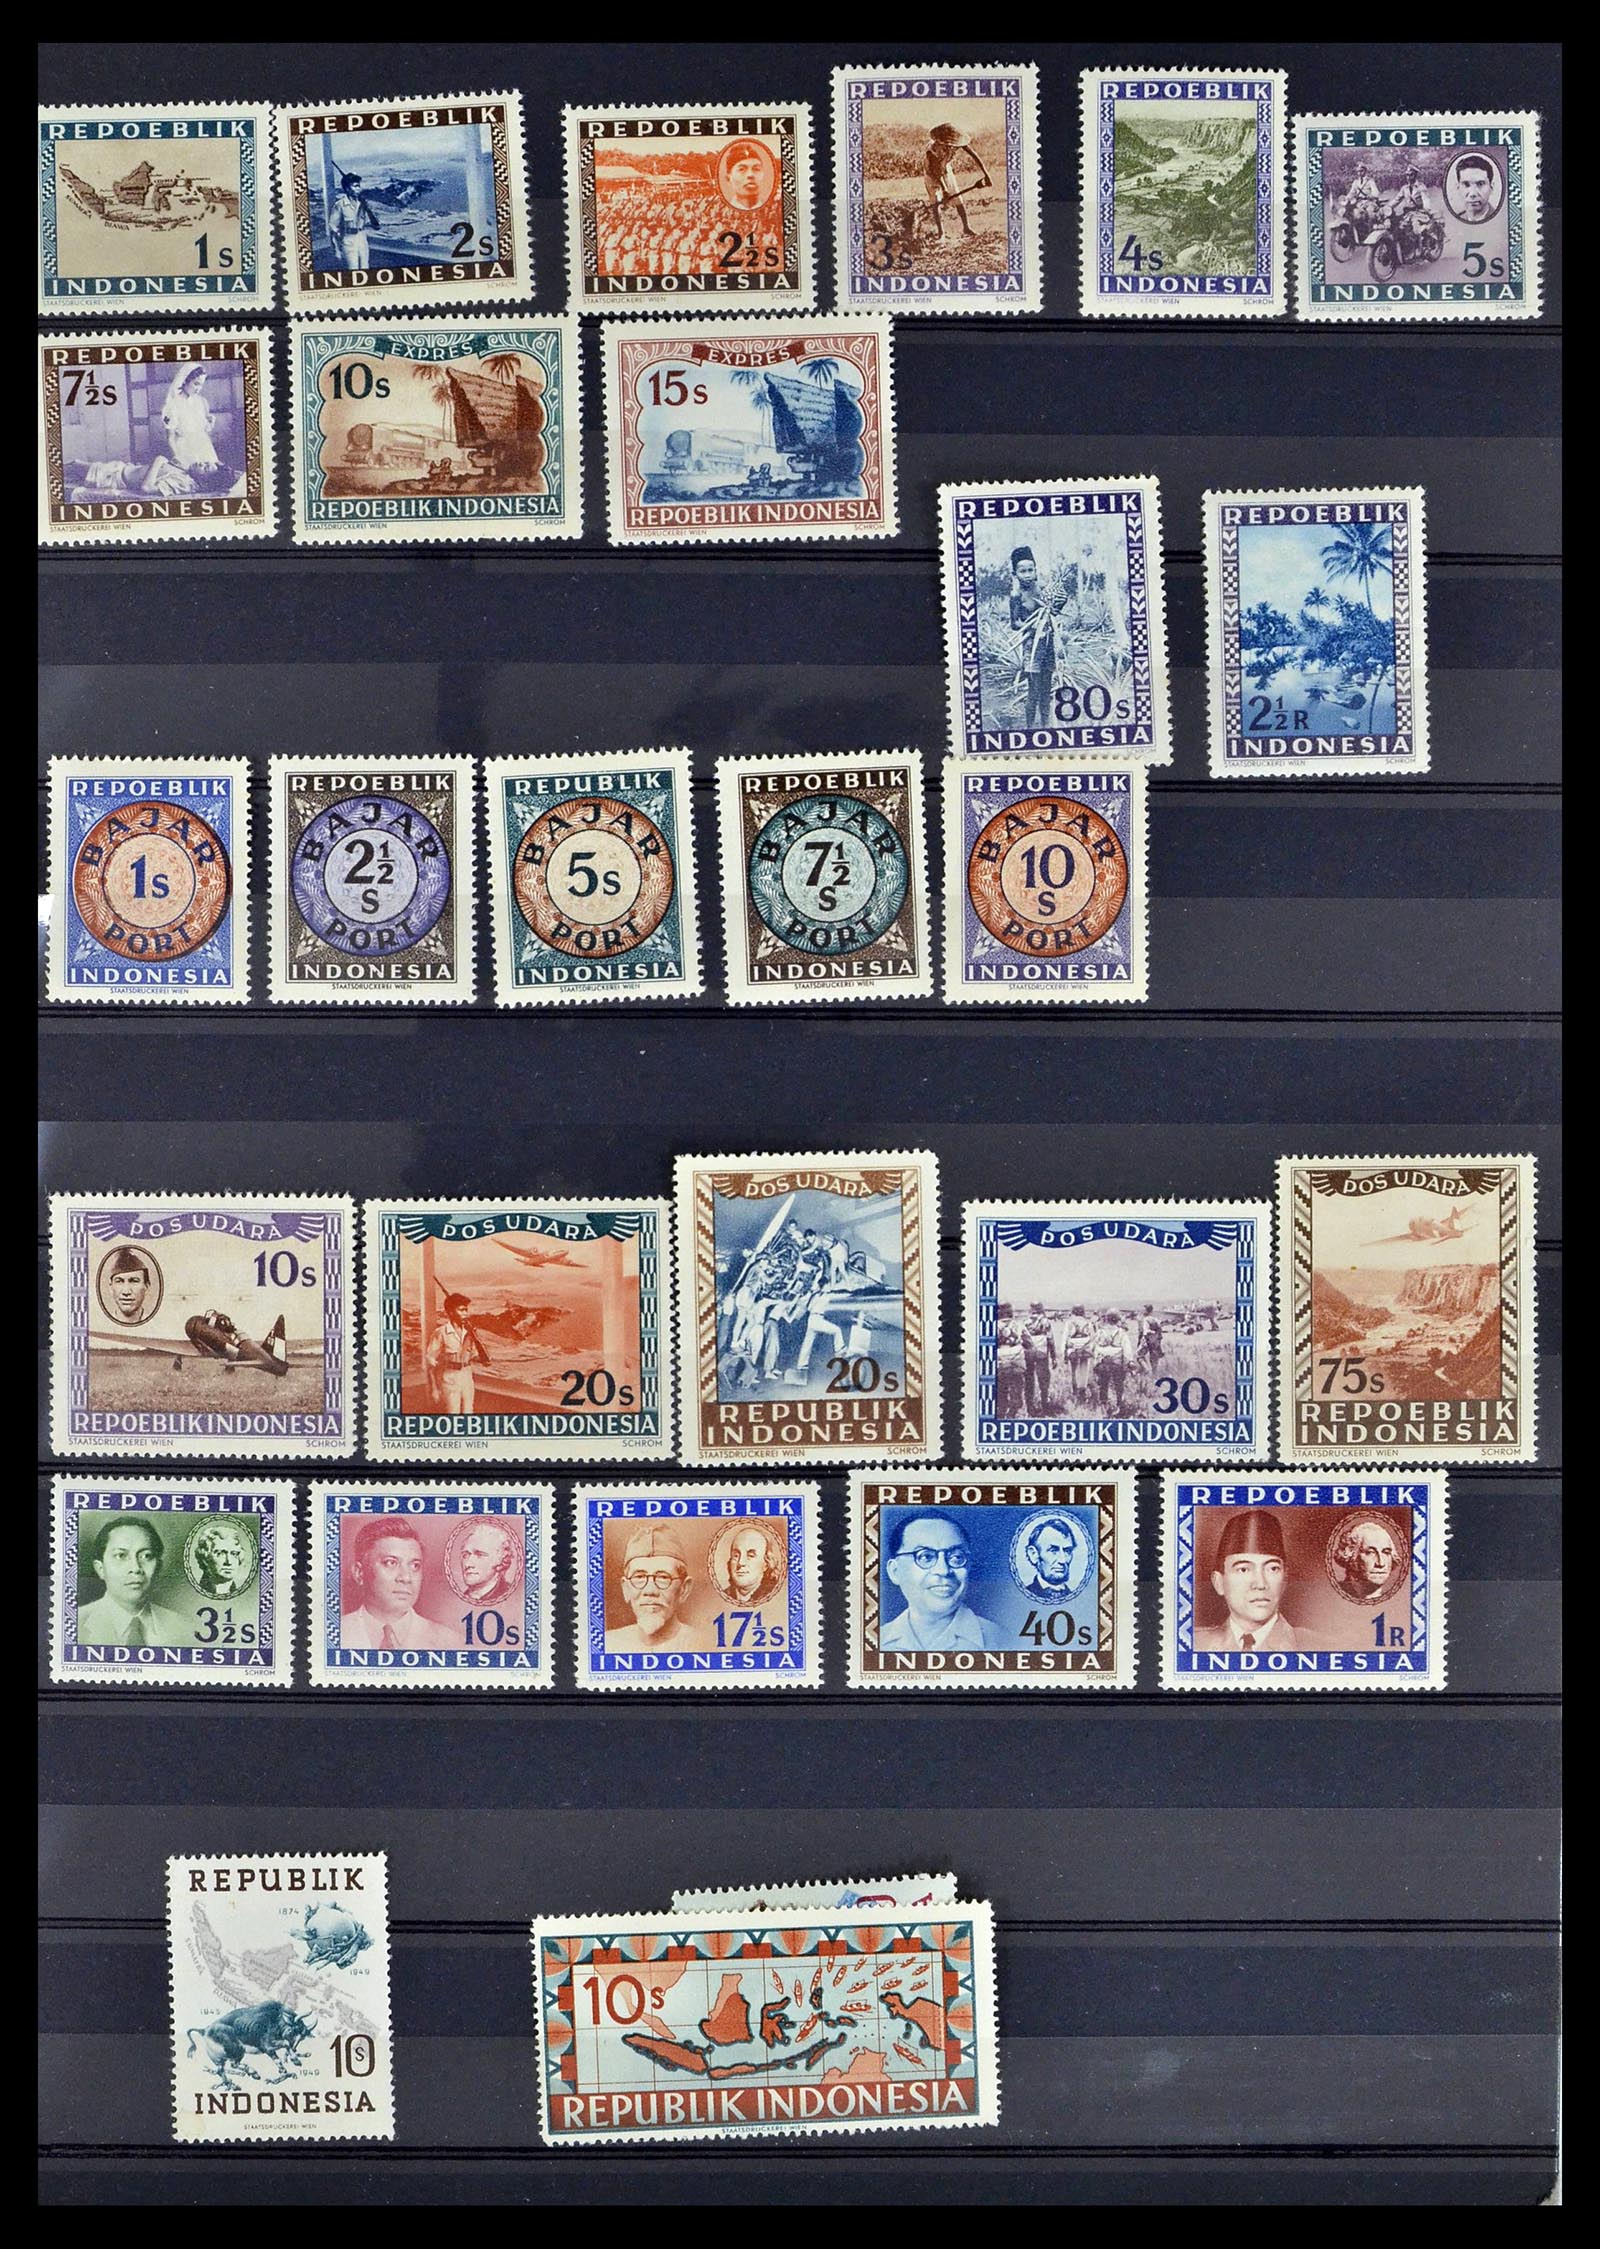 39026 0080 - Stamp collection 39026 Dutch east Indies and Suriname 1864-1975.